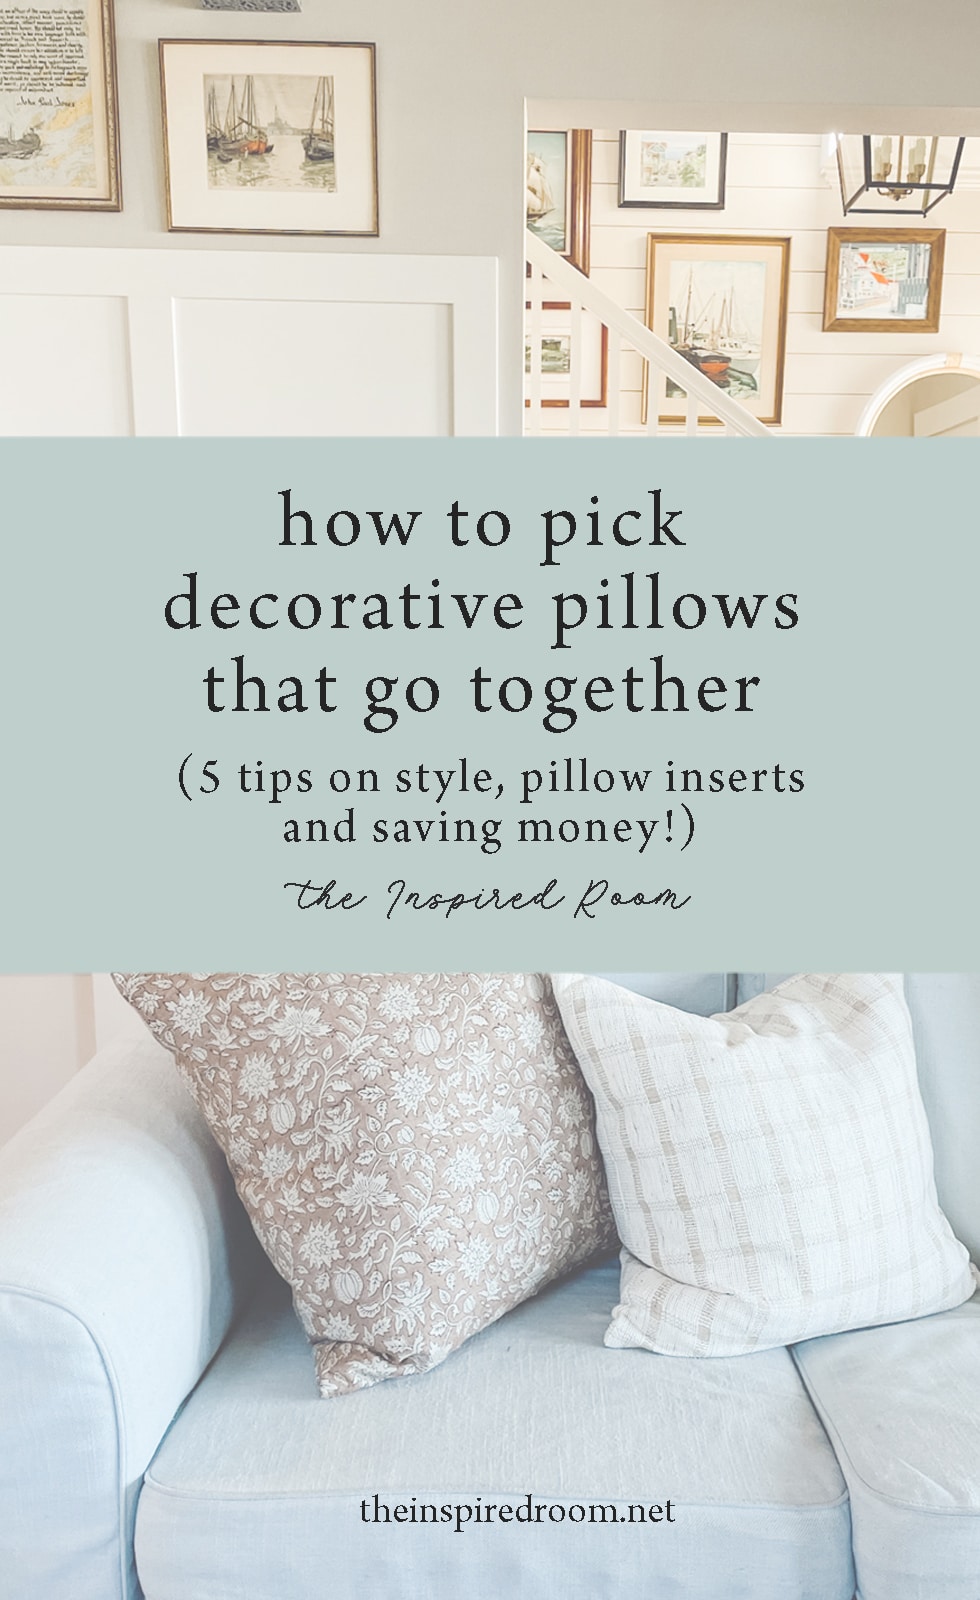 How to Pick Decorative Pillows That Go Together (5 tips on style, pillow inserts and saving money!)